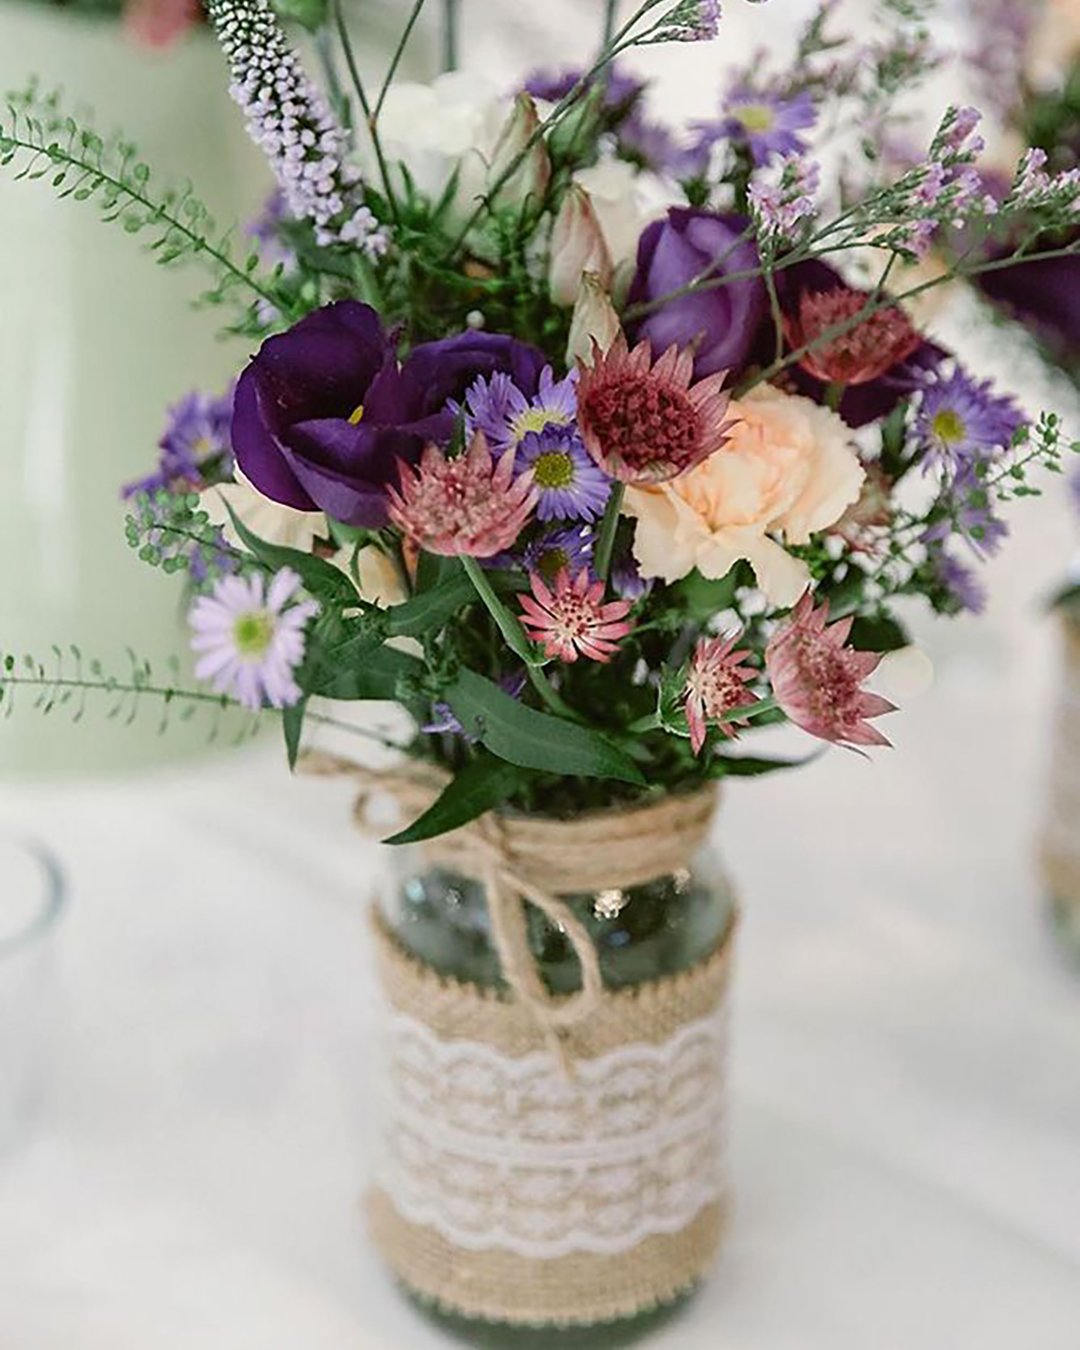 rustic wedding décor centerpiece decorated with lace wildflowers and roses decorate the table natalie j watts via instagram